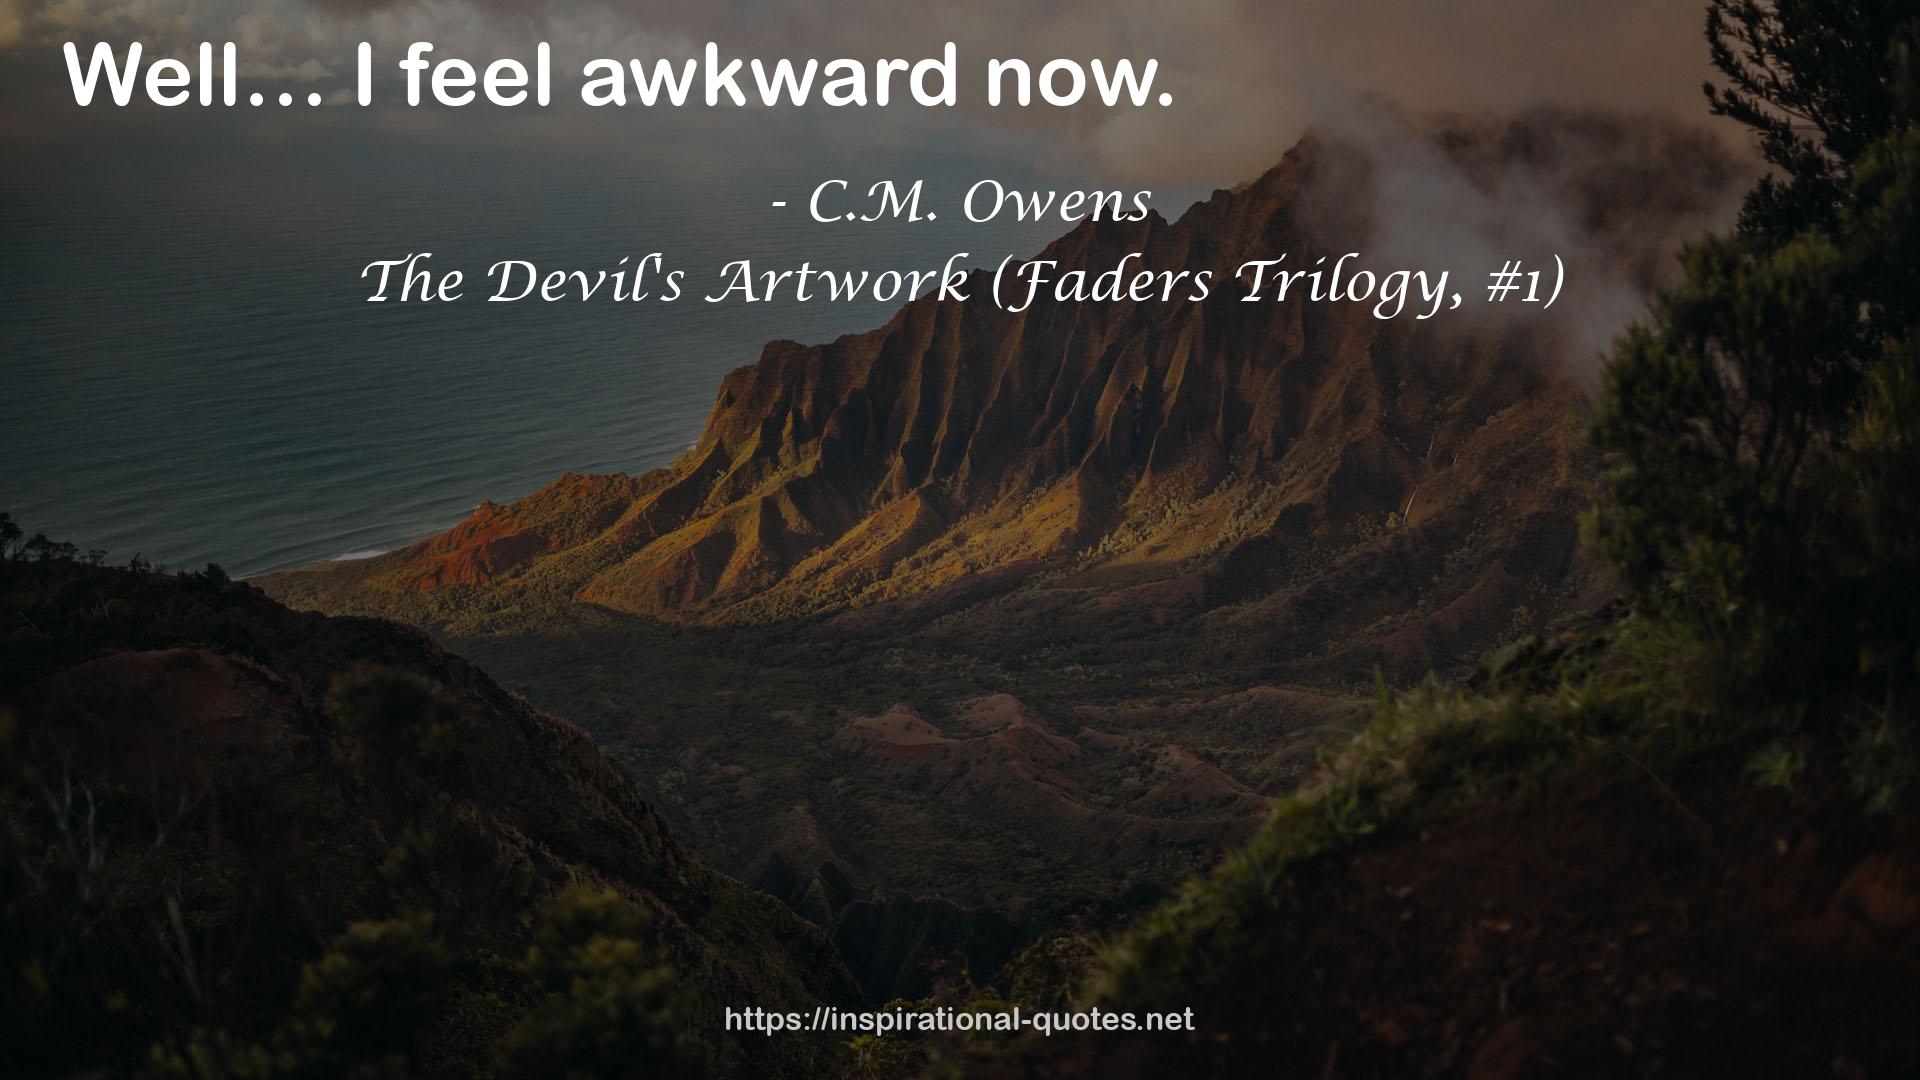 The Devil's Artwork (Faders Trilogy, #1) QUOTES